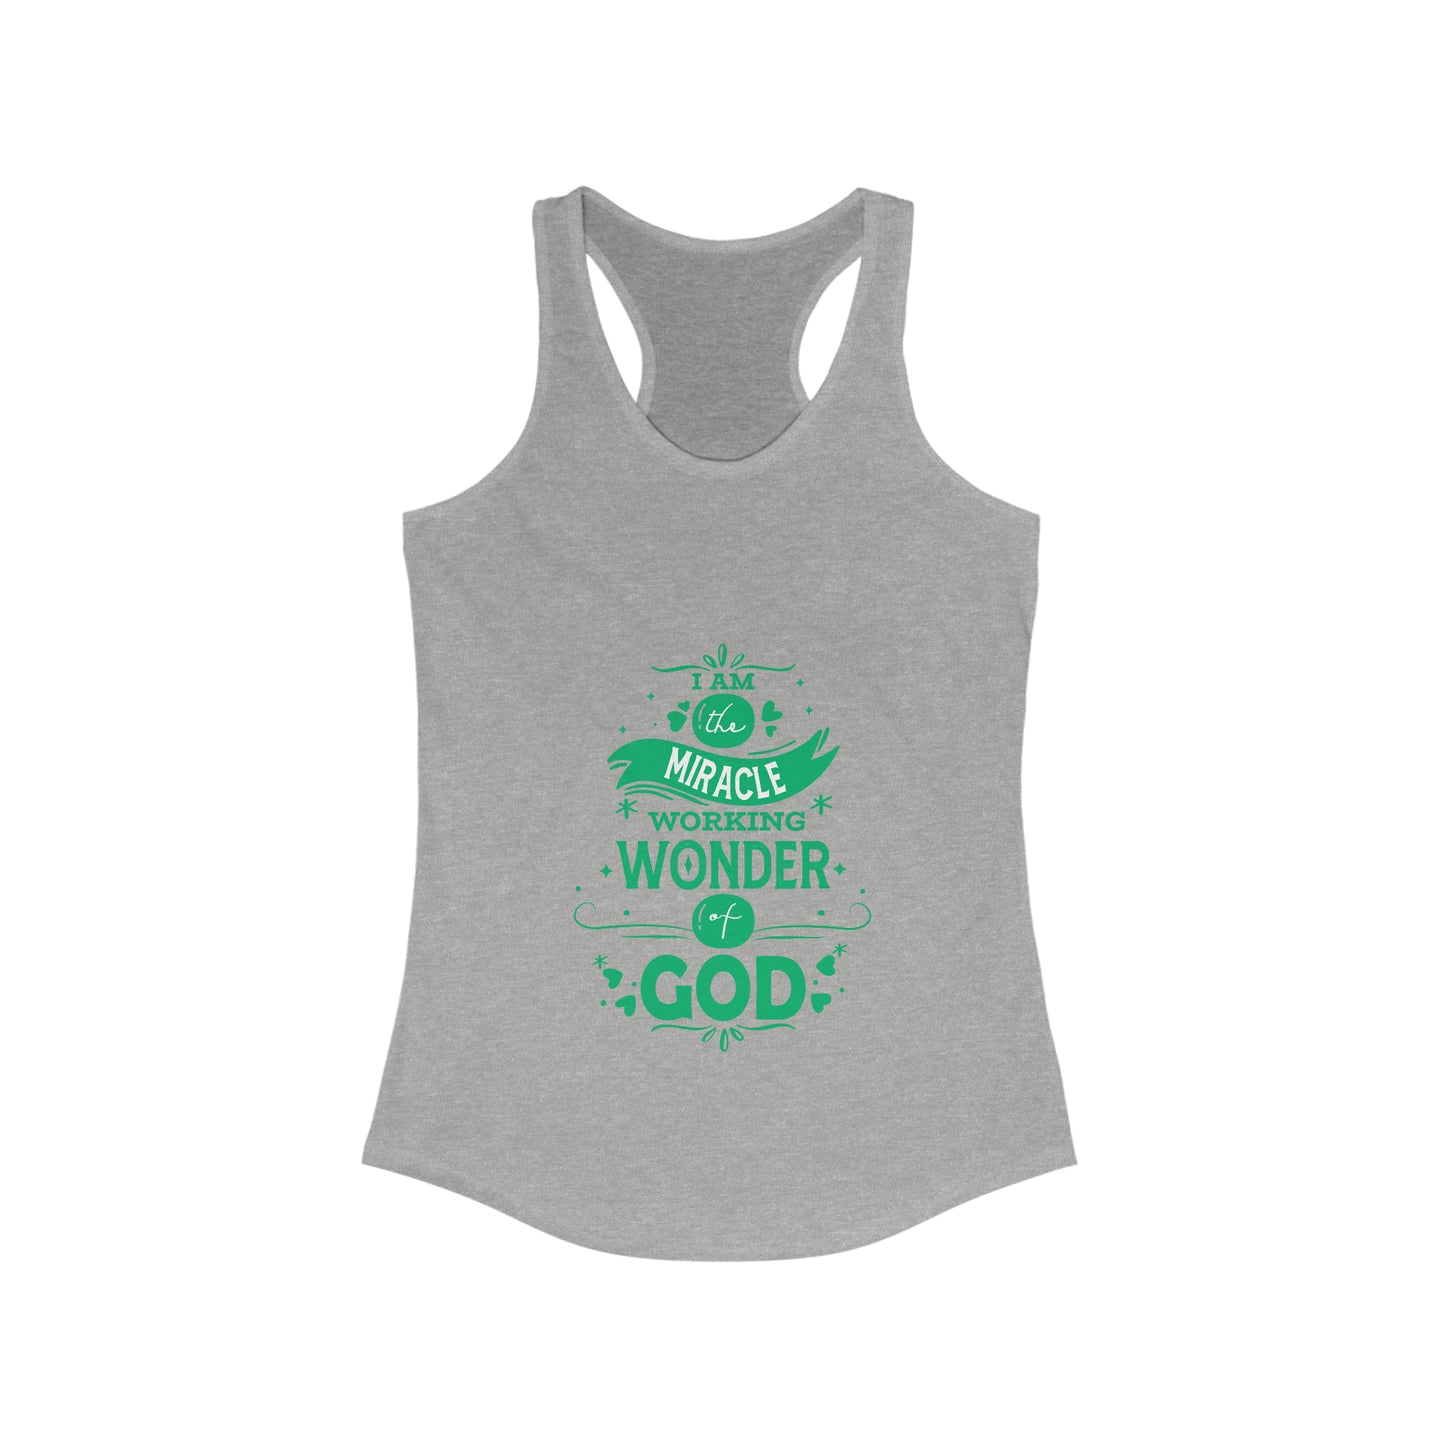 I Am A Miracle Working Wonder Of God Slim Fit Tank-top